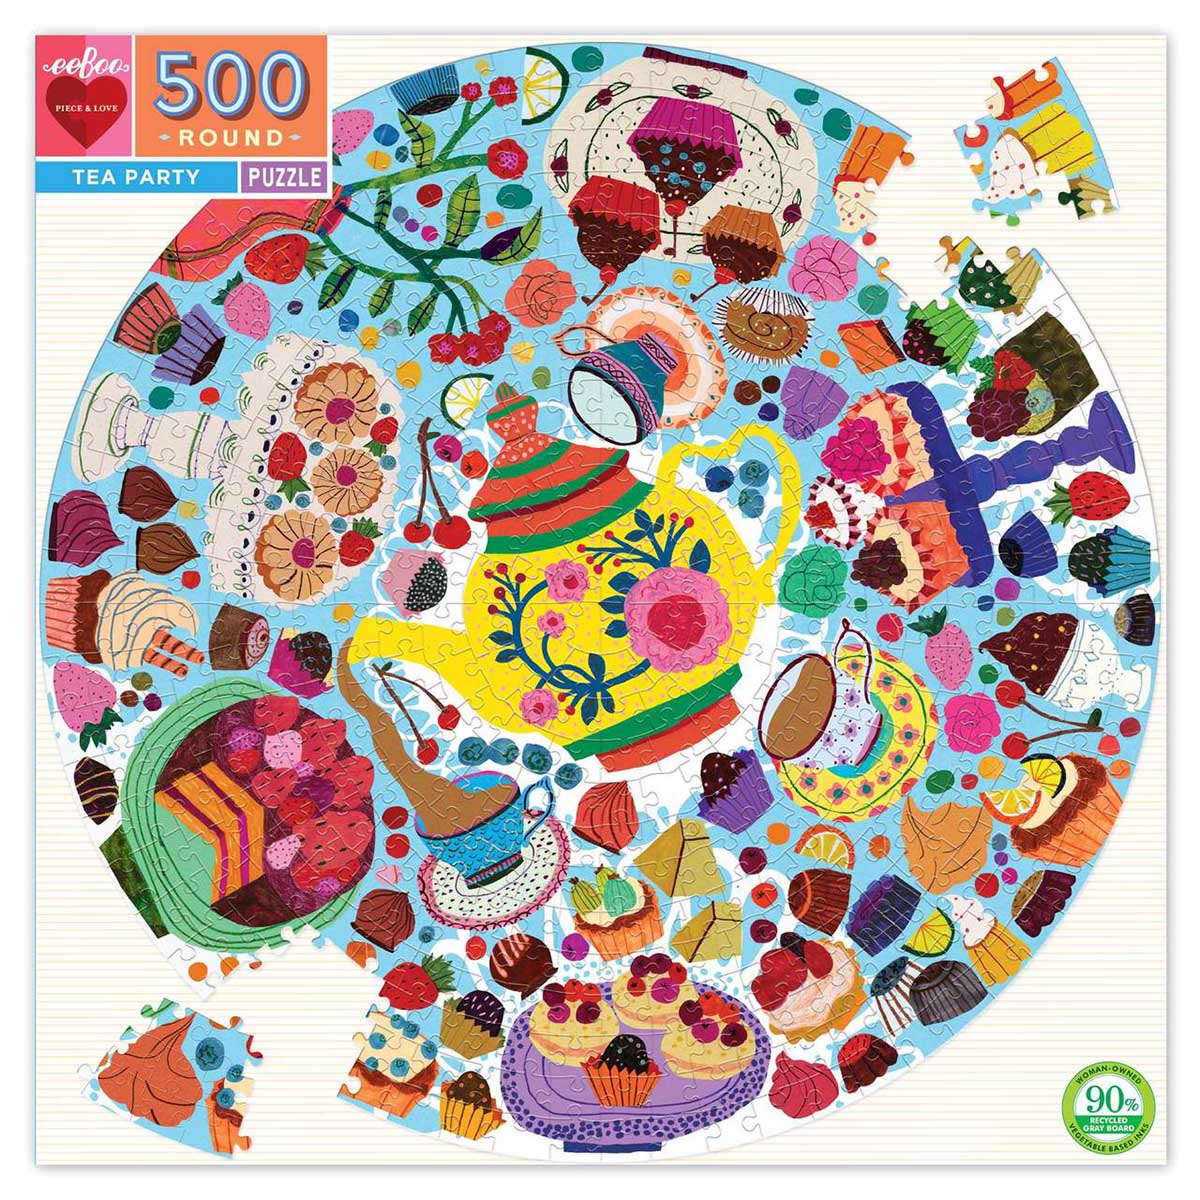 Tea Party Drinks & Adult Beverage Jigsaw Puzzle